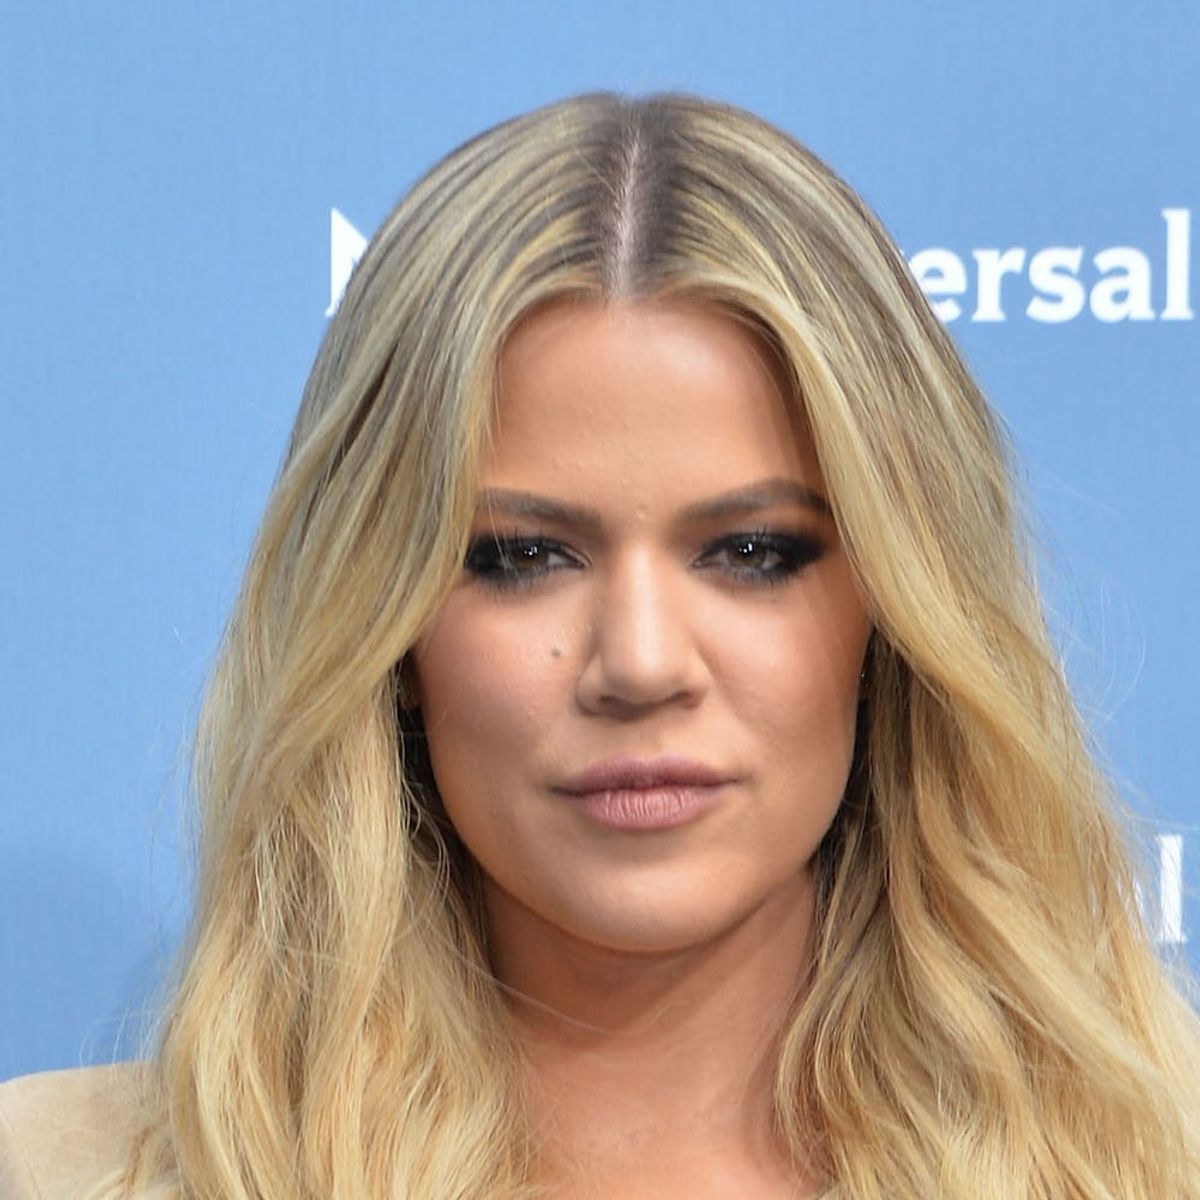 Khloé Kardashian Is Being Sued for Making *This* Instagram Error